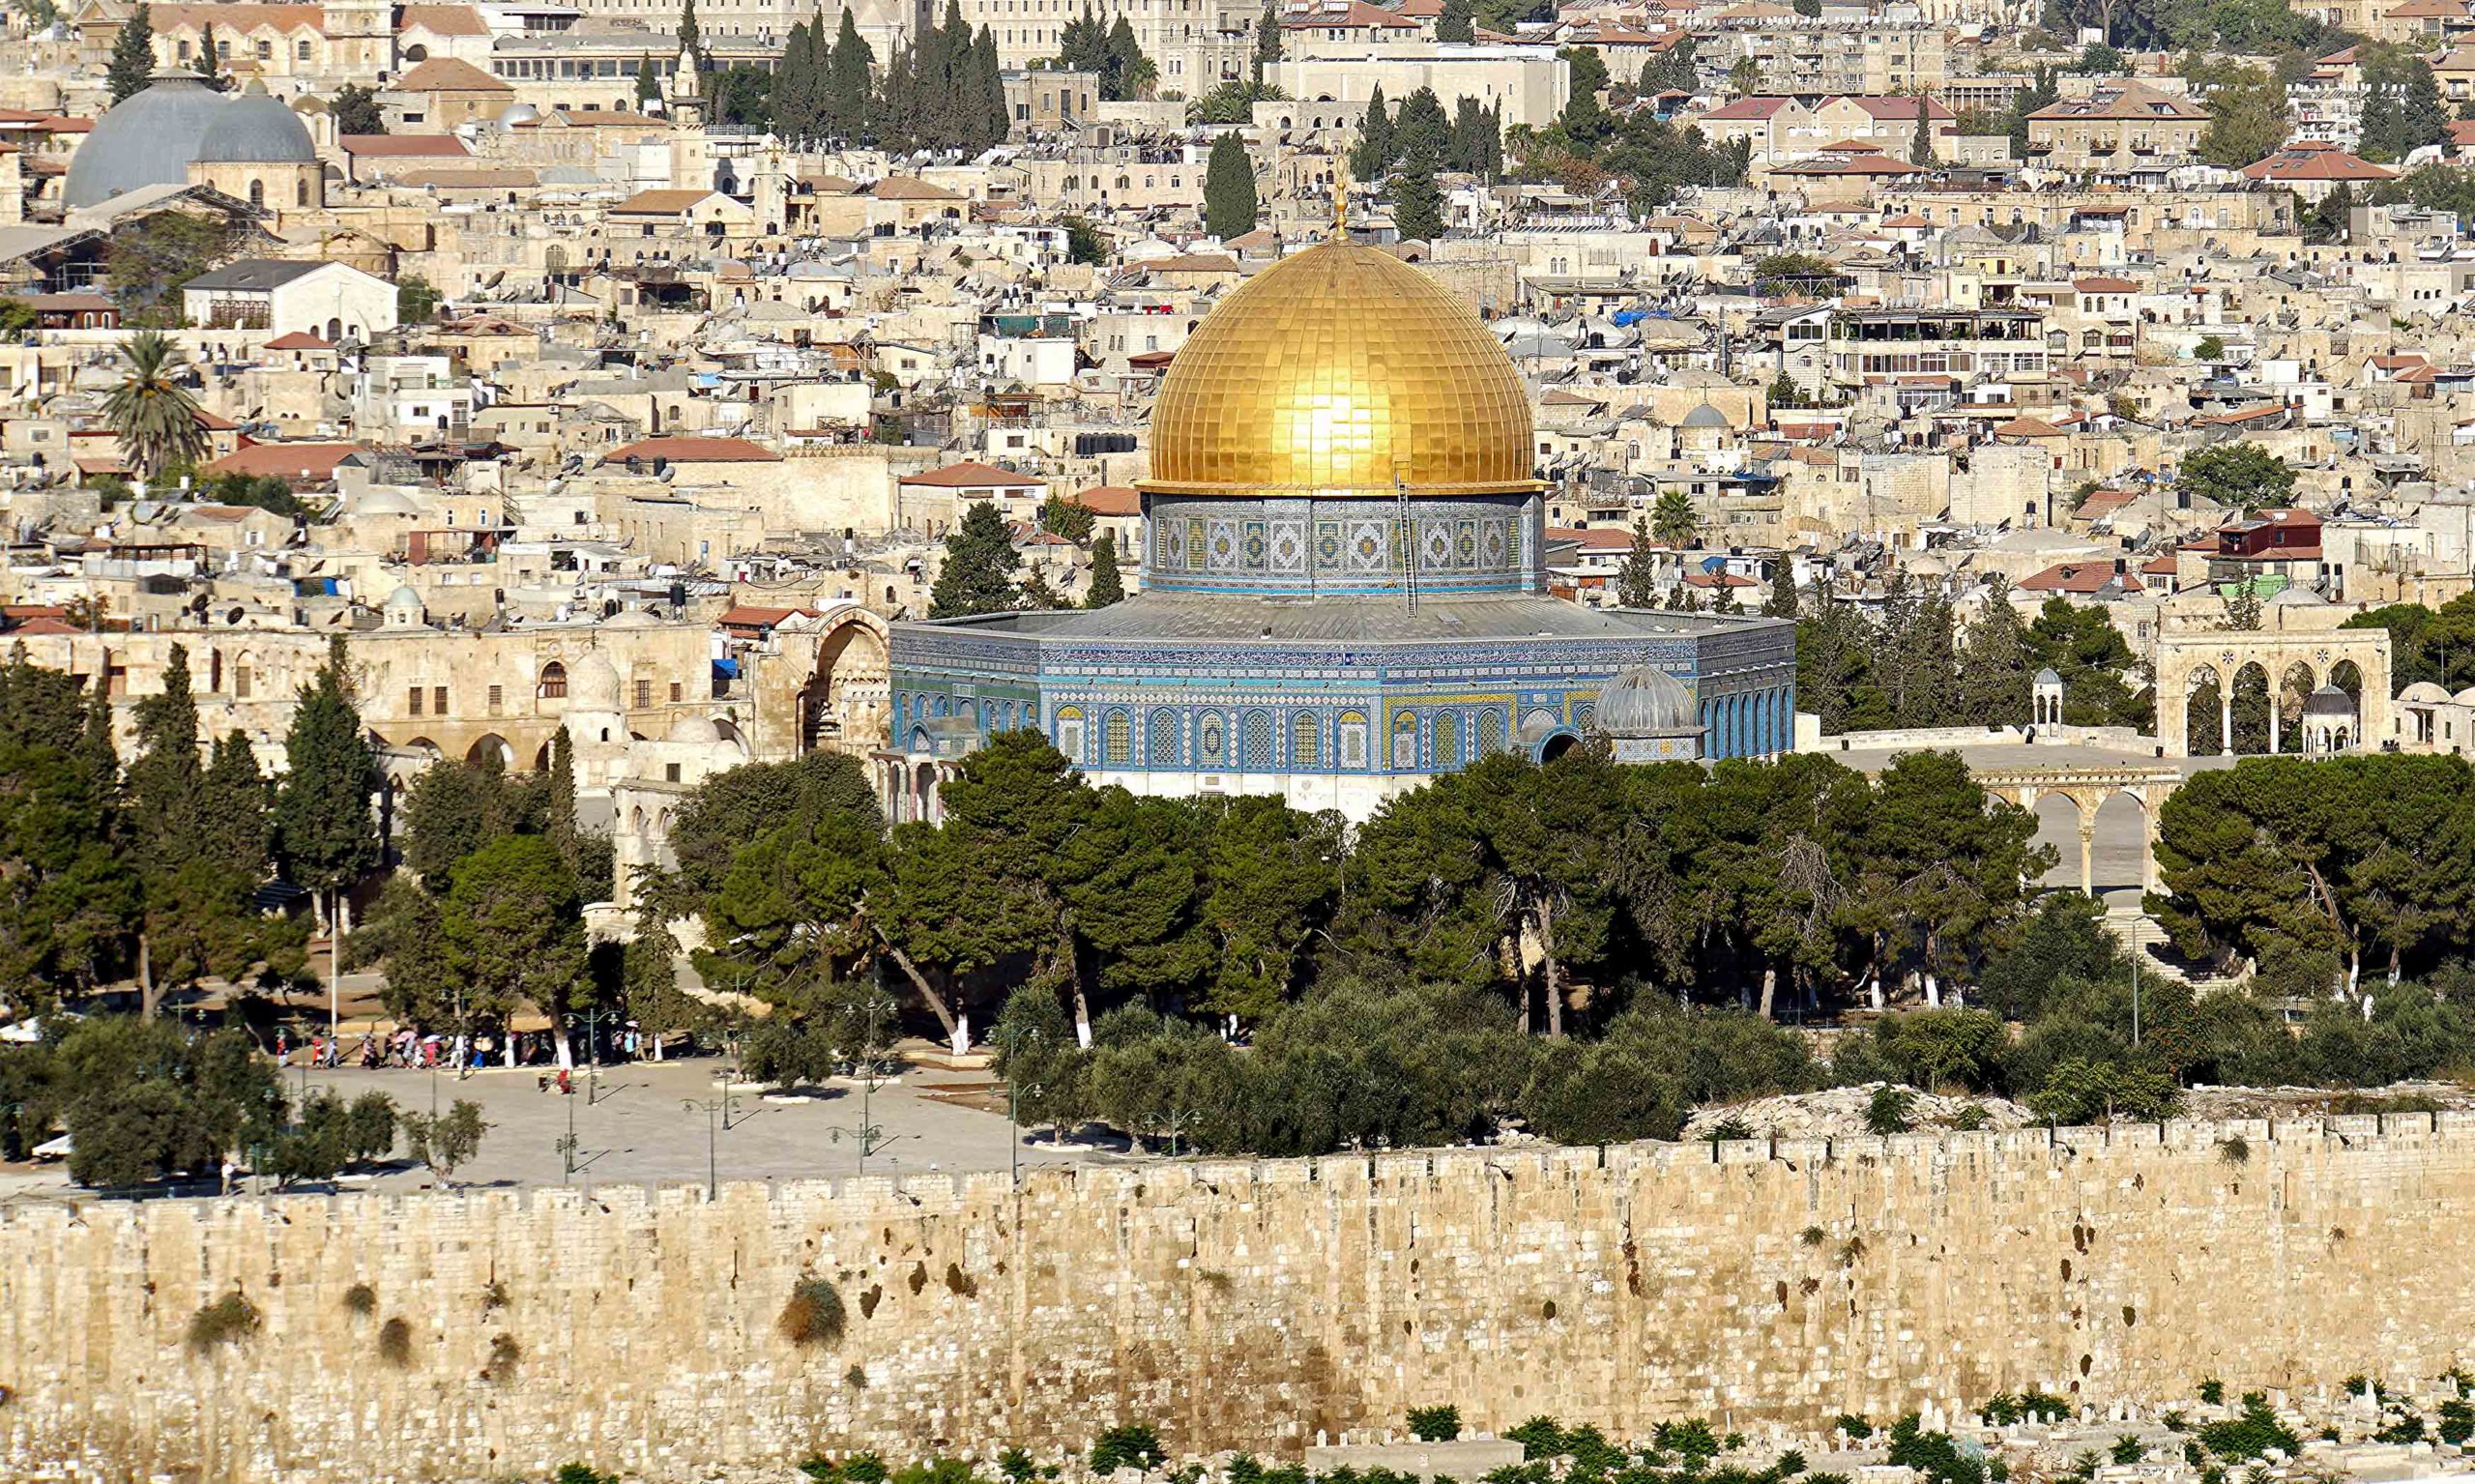 An unprecedented look inside the Dome of the Rock